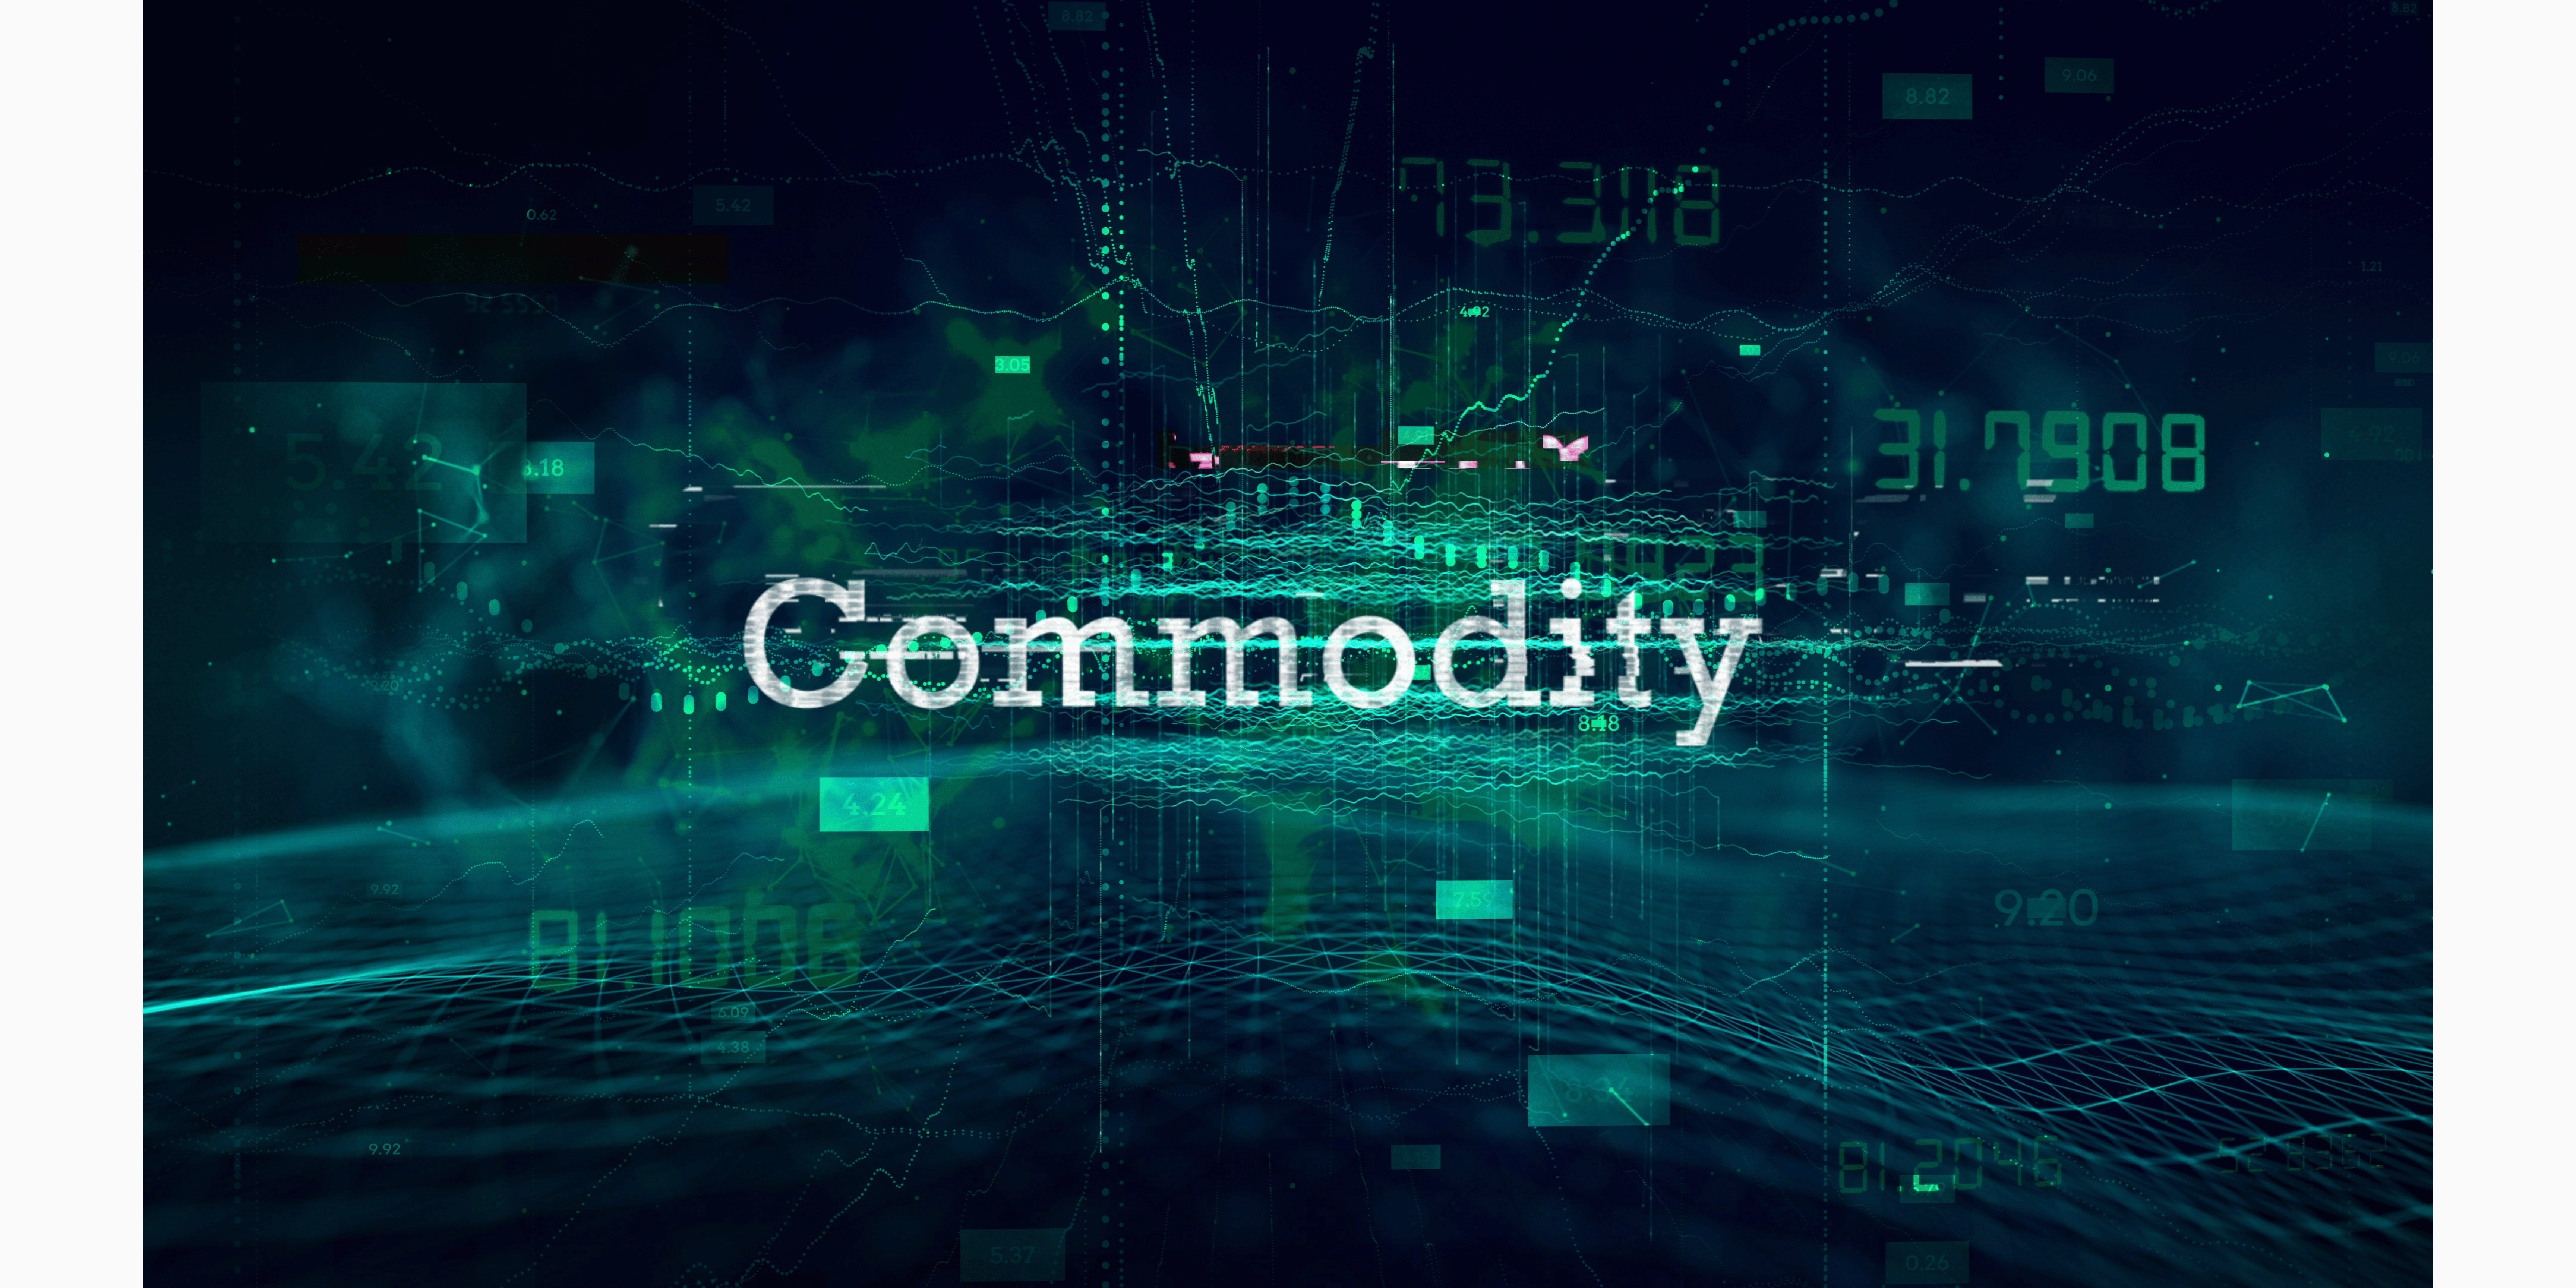 physical commodity trading platforms